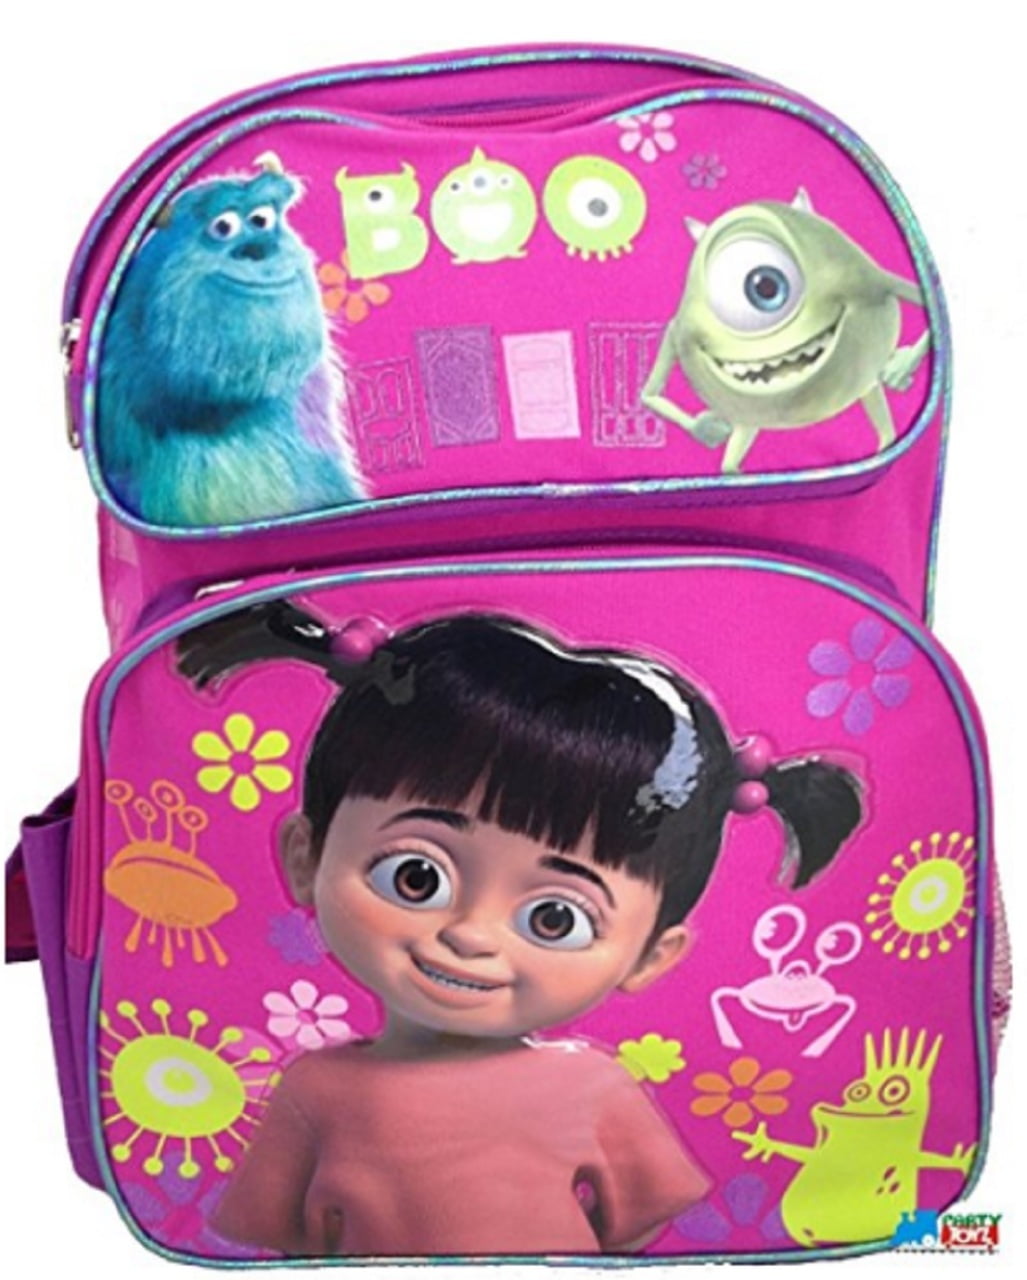 Sully - Monsters Inc Backpack for Sale by RyallDesign